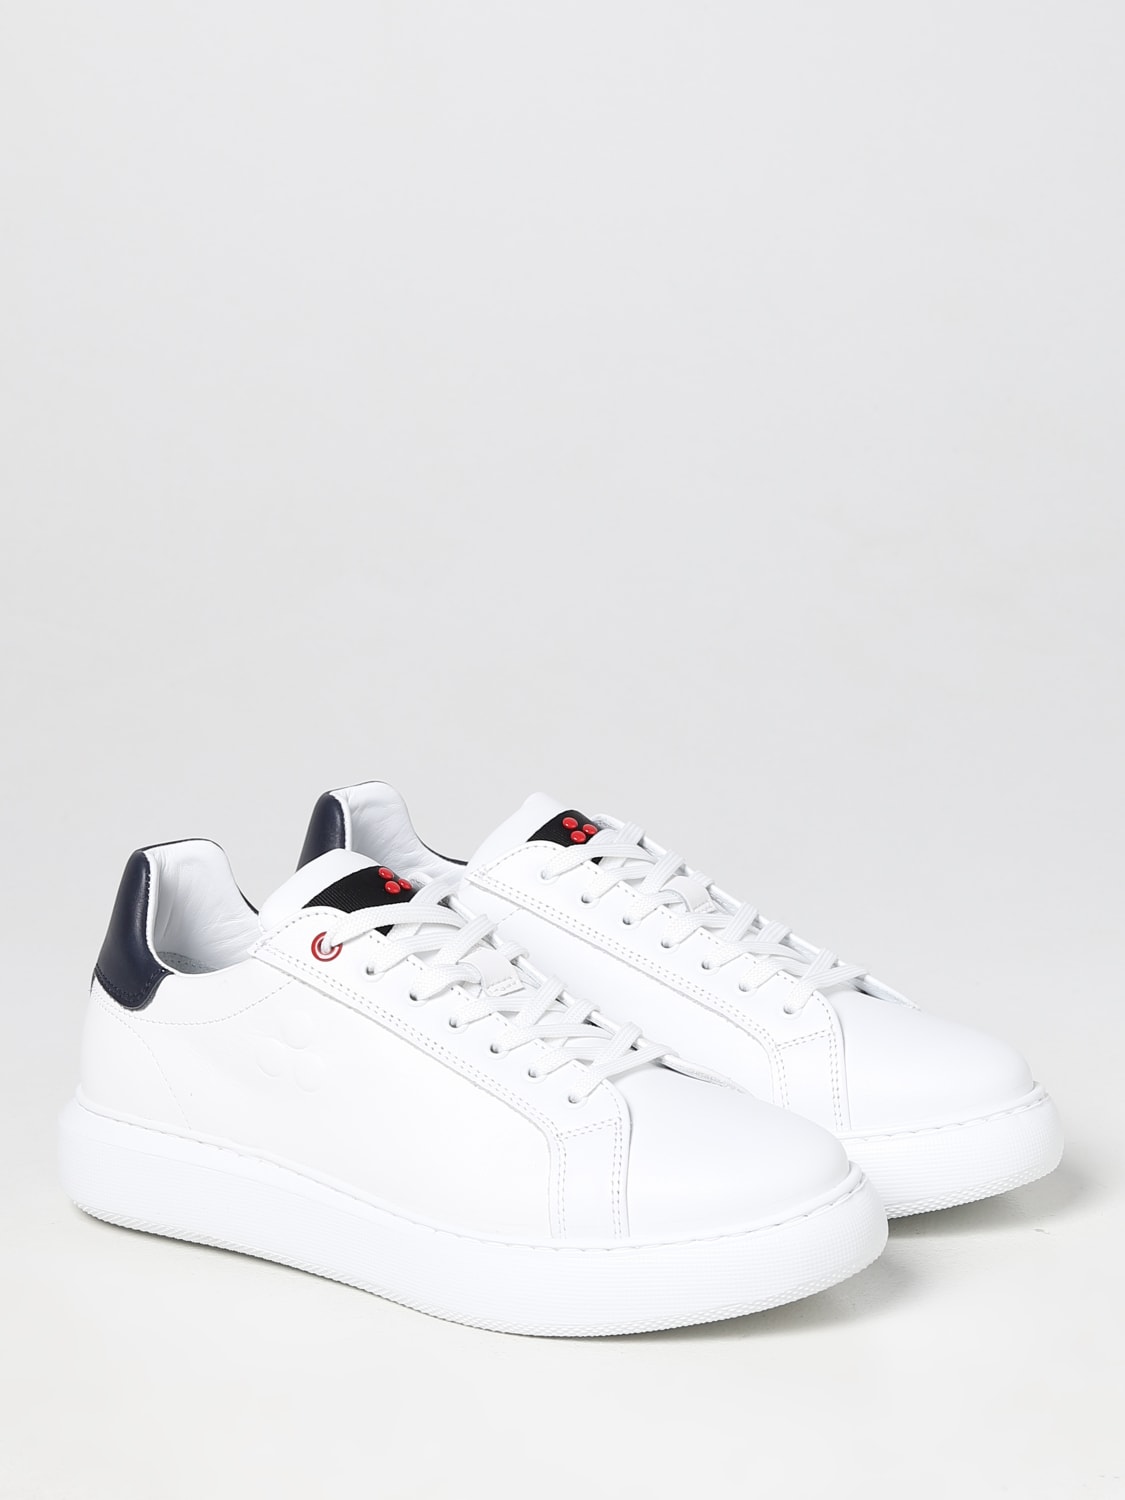 Trainers Peuterey: Peuterey trainers for men white 1 2